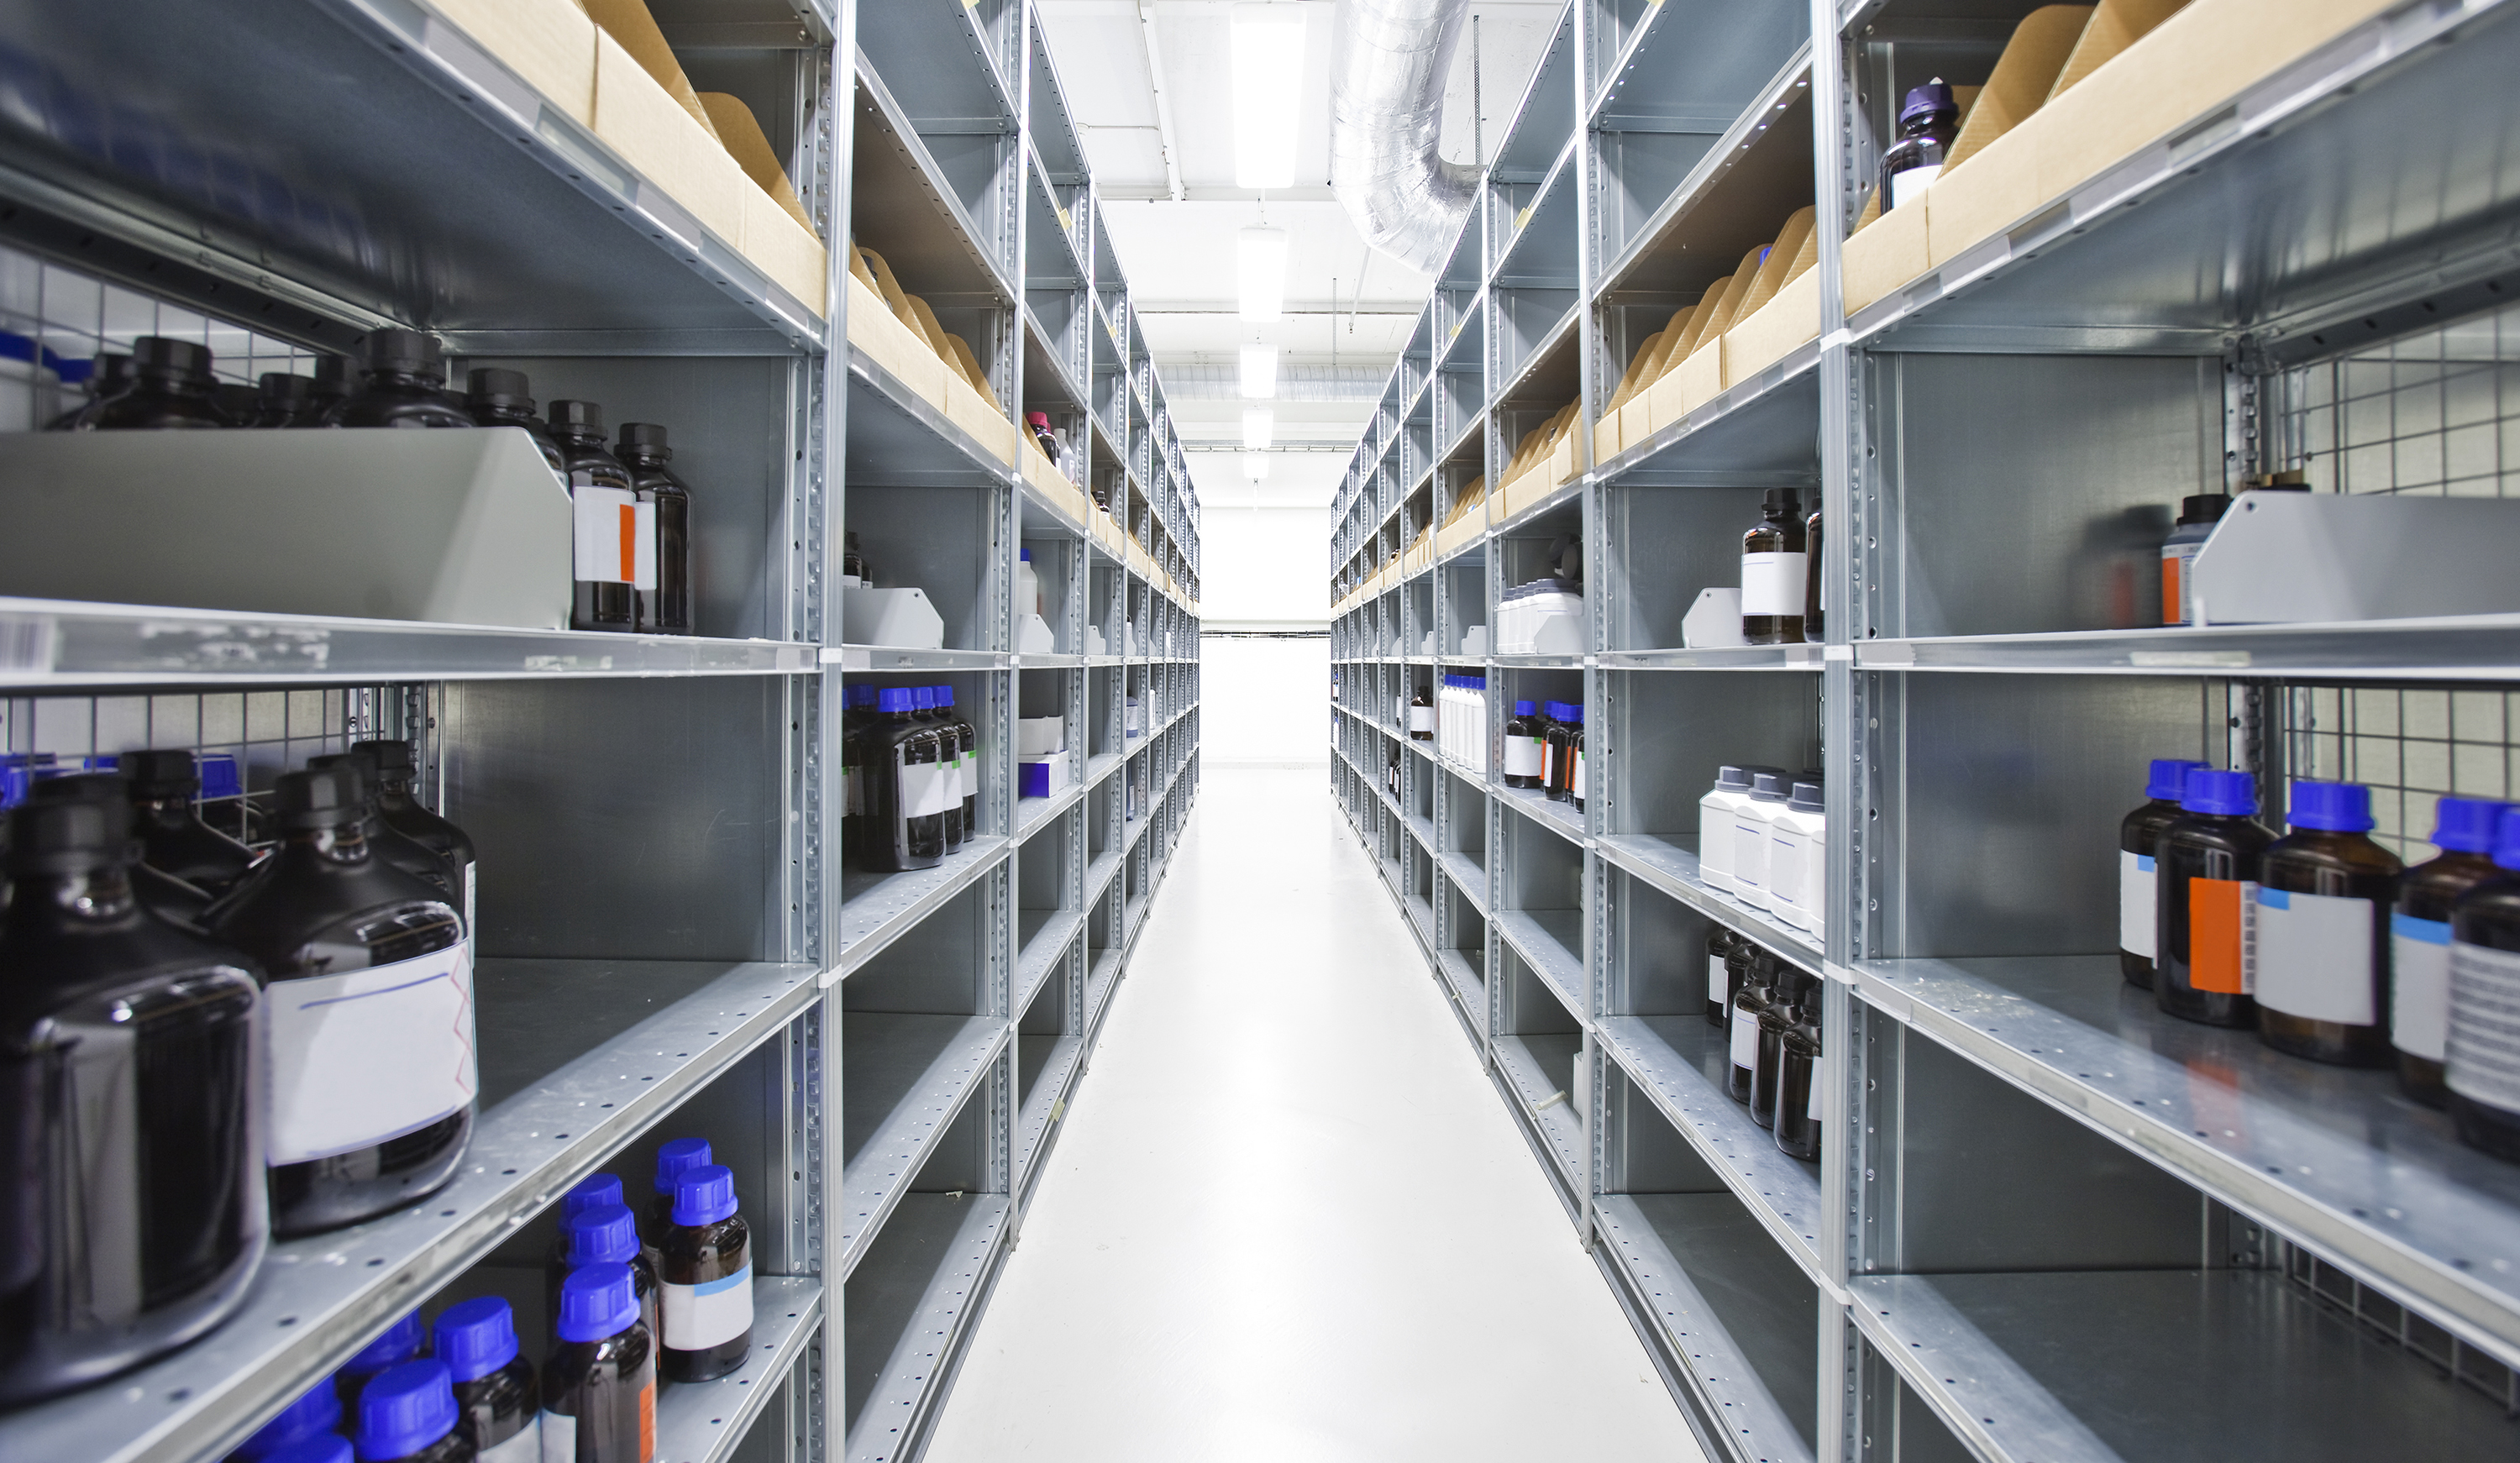 6 important considerations when designing a strong room for medicine storage